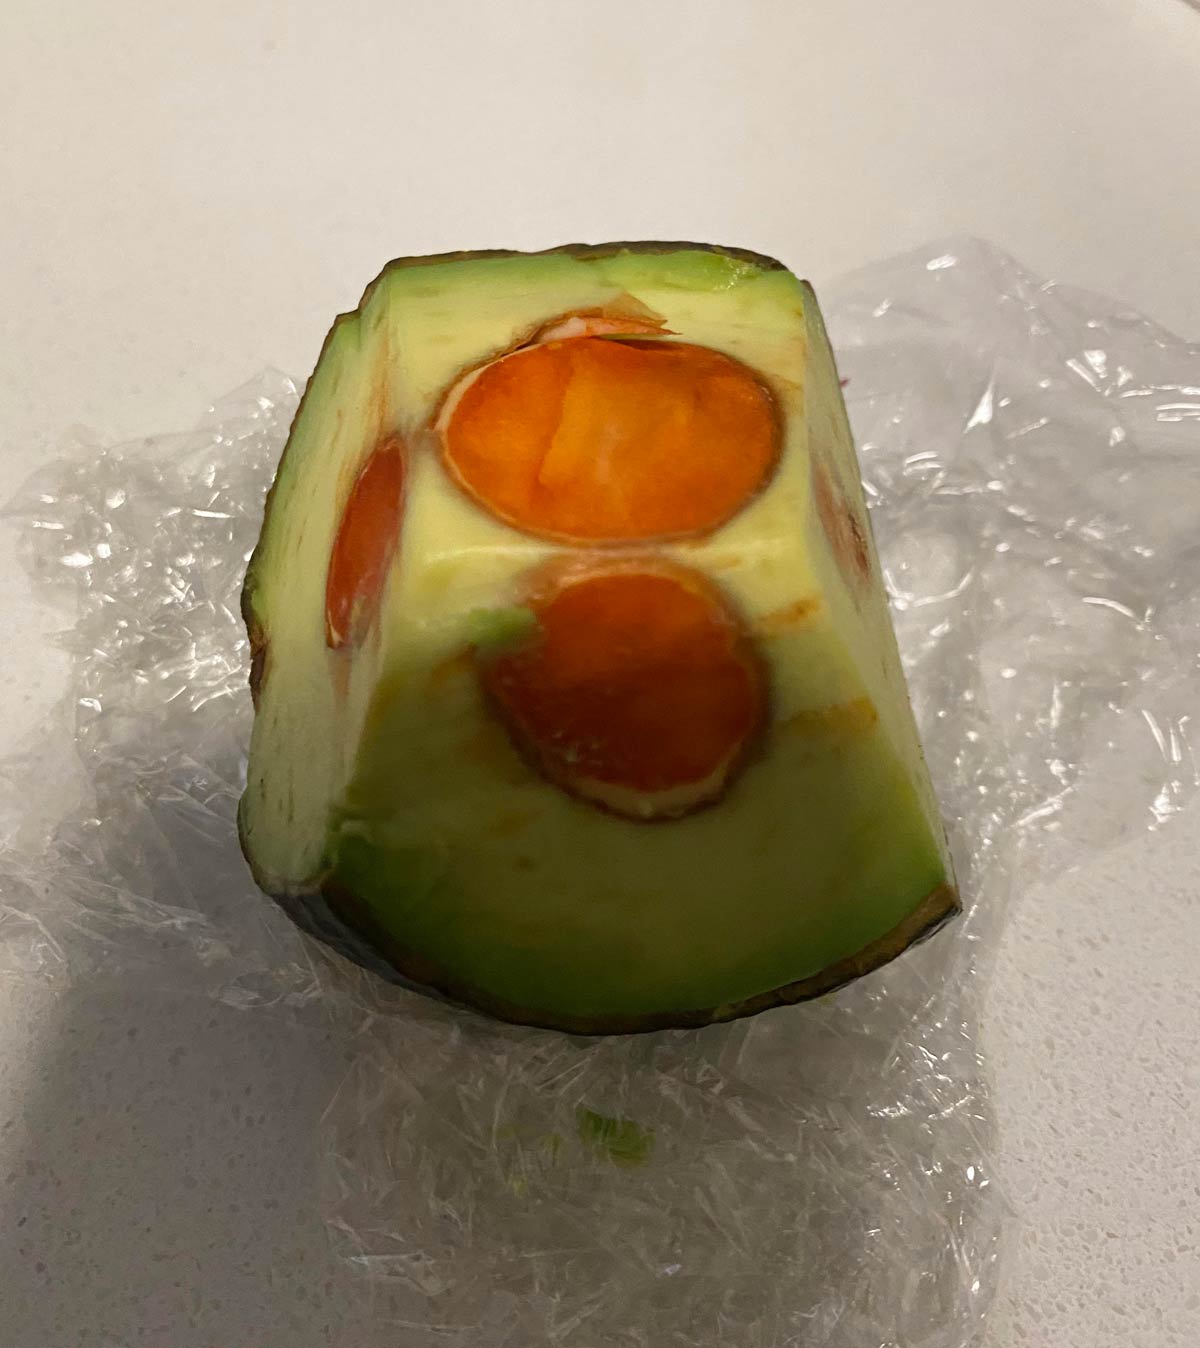 This is how my wife deals with avocados